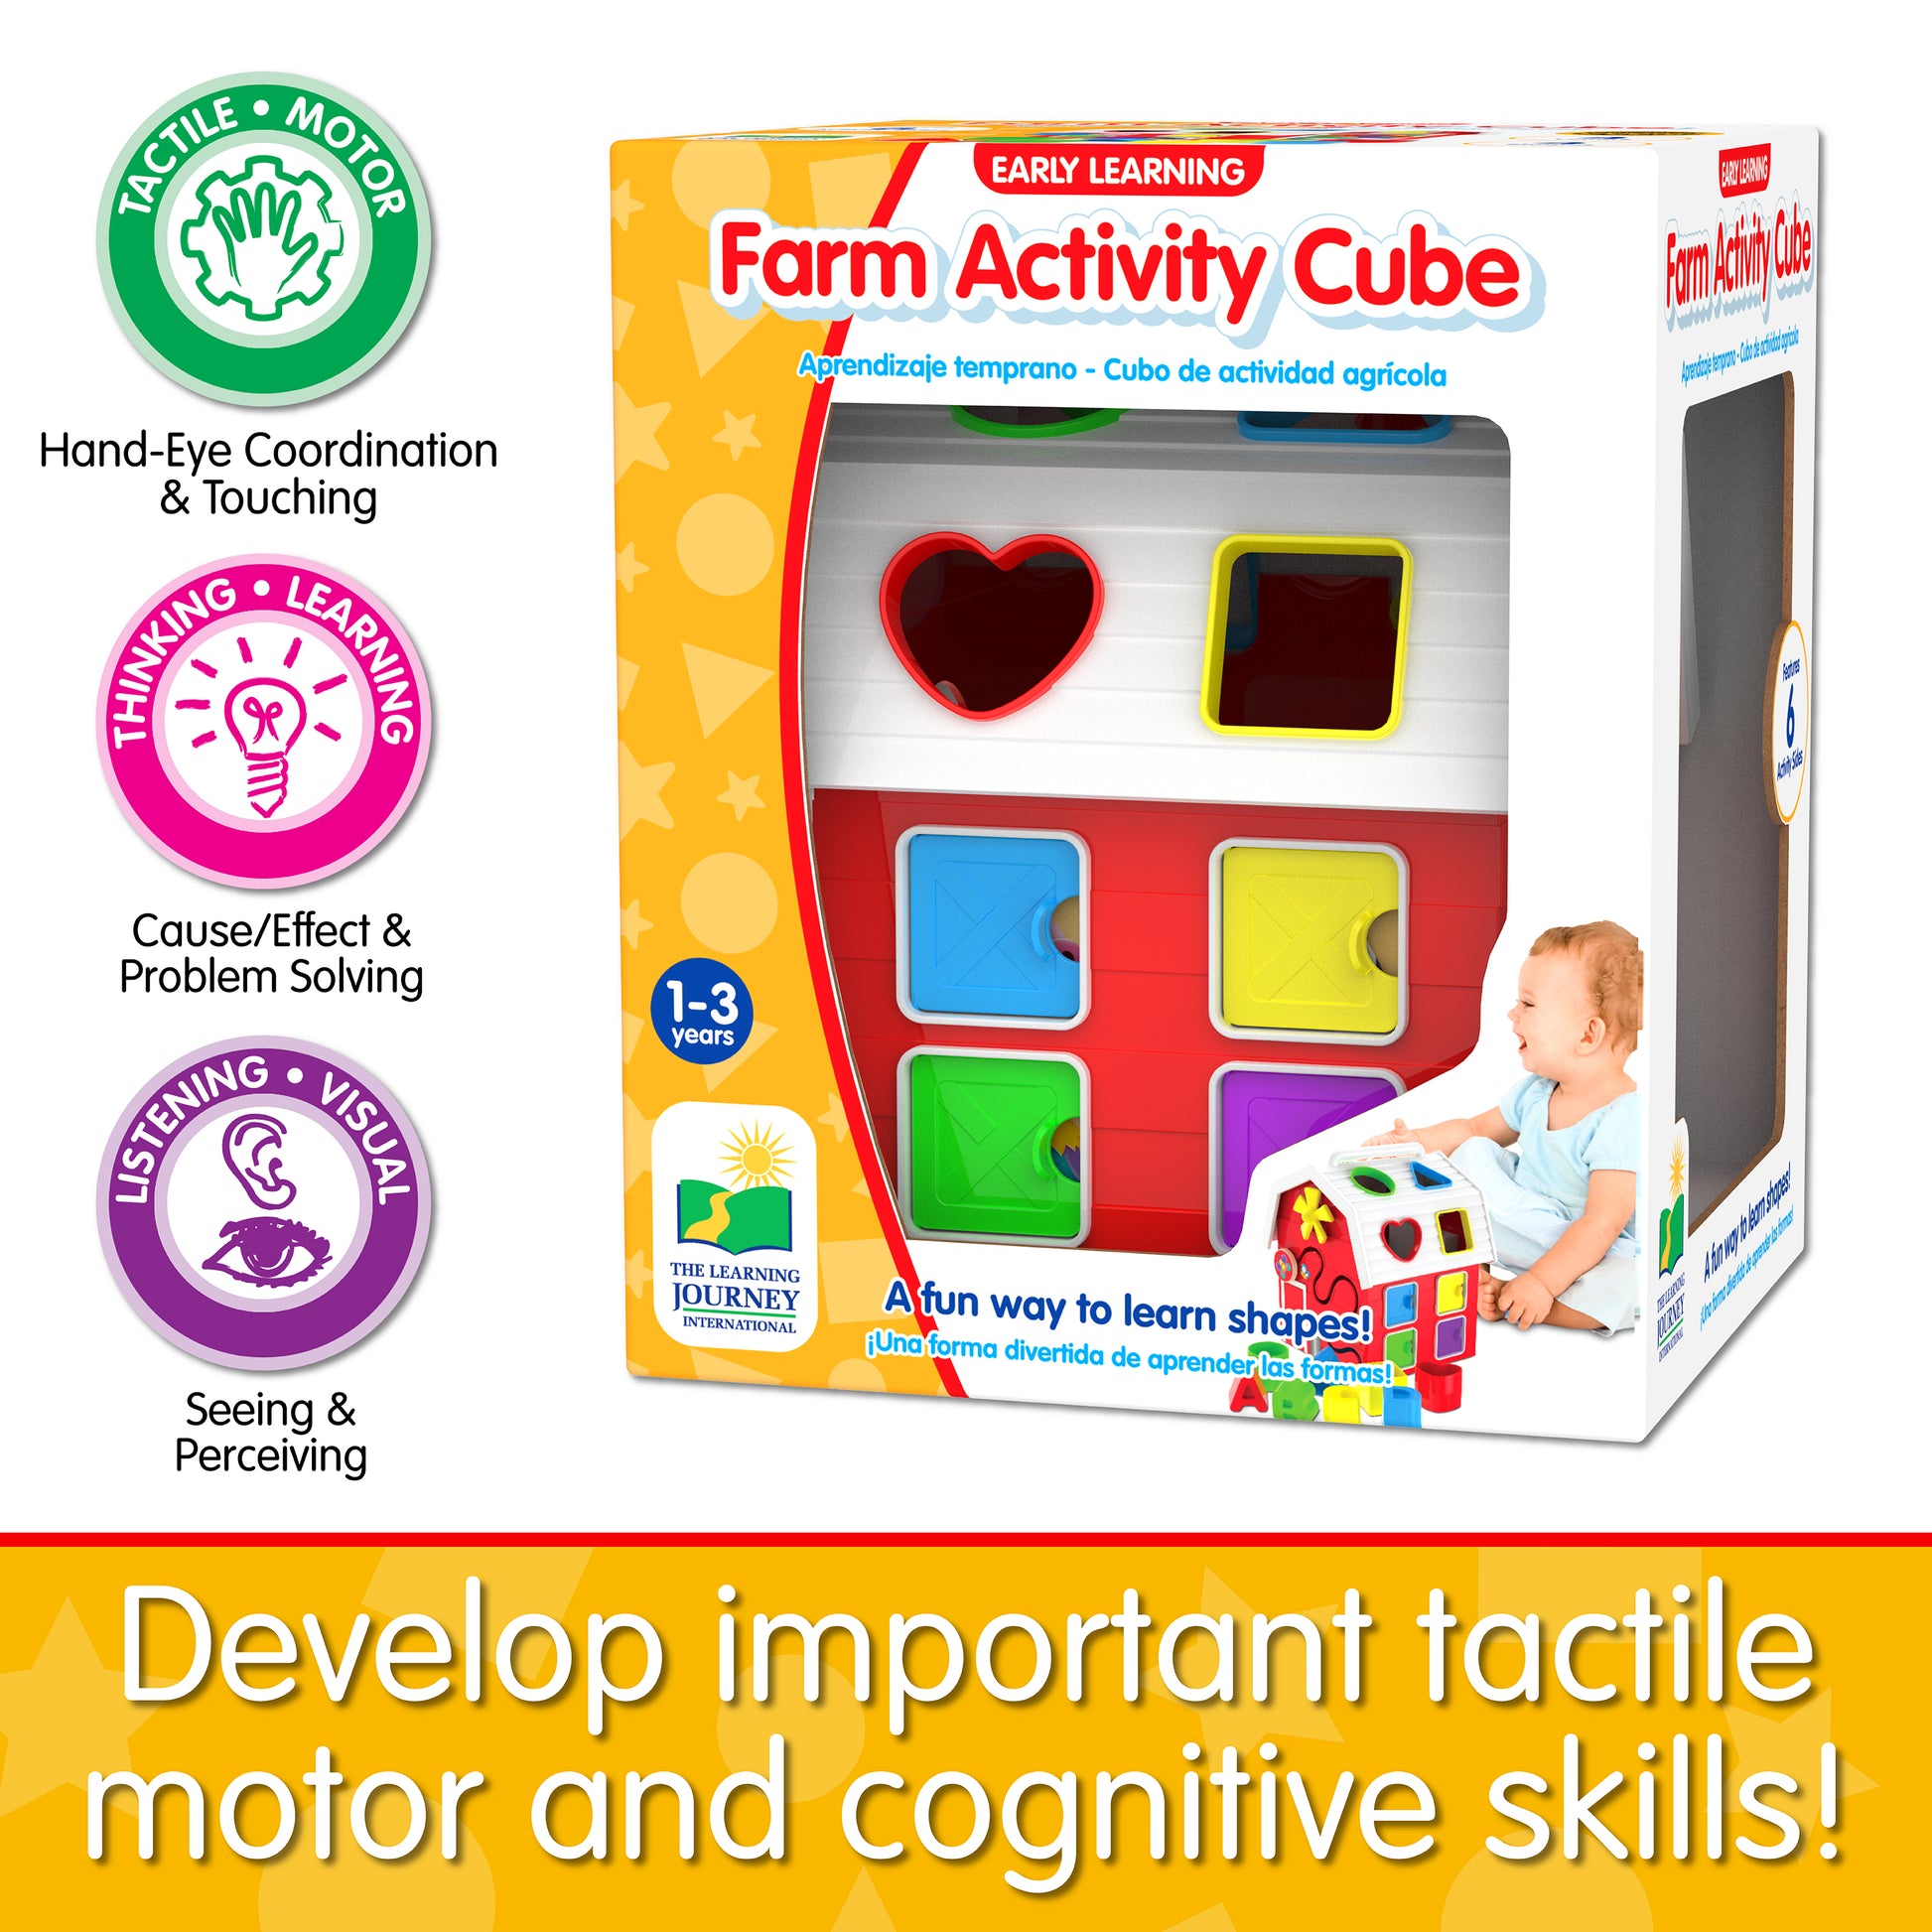 Infographic of Farm Activity Cube's educational benefits that reads, "Develop important tactile motor and cognitive skills!"